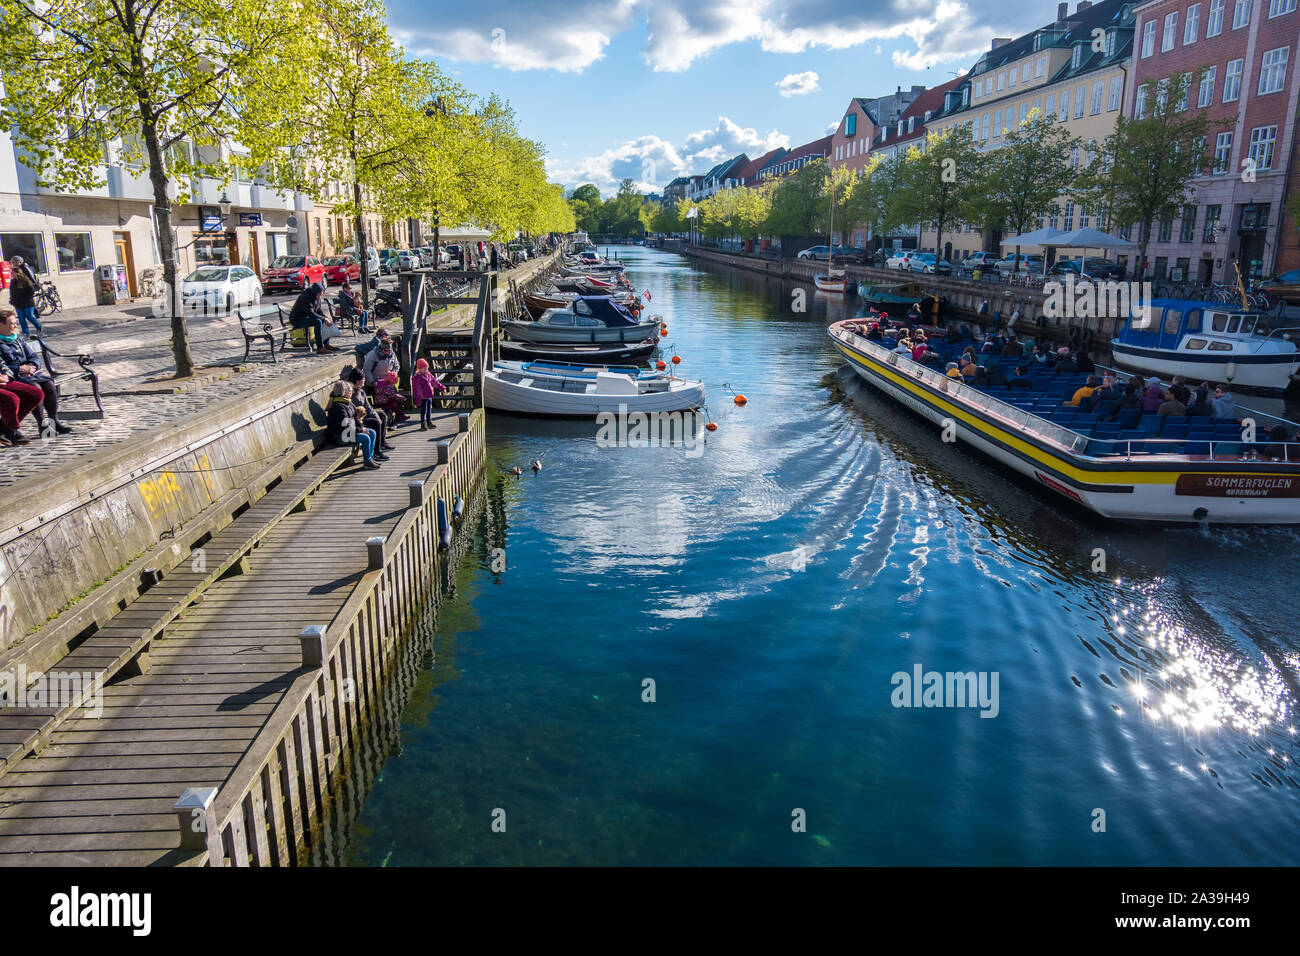 Copenhagen, Denmark - May 04, 2019: People relax on the waterfront while others explore Copenhagen on a tourist boat Stock Photo